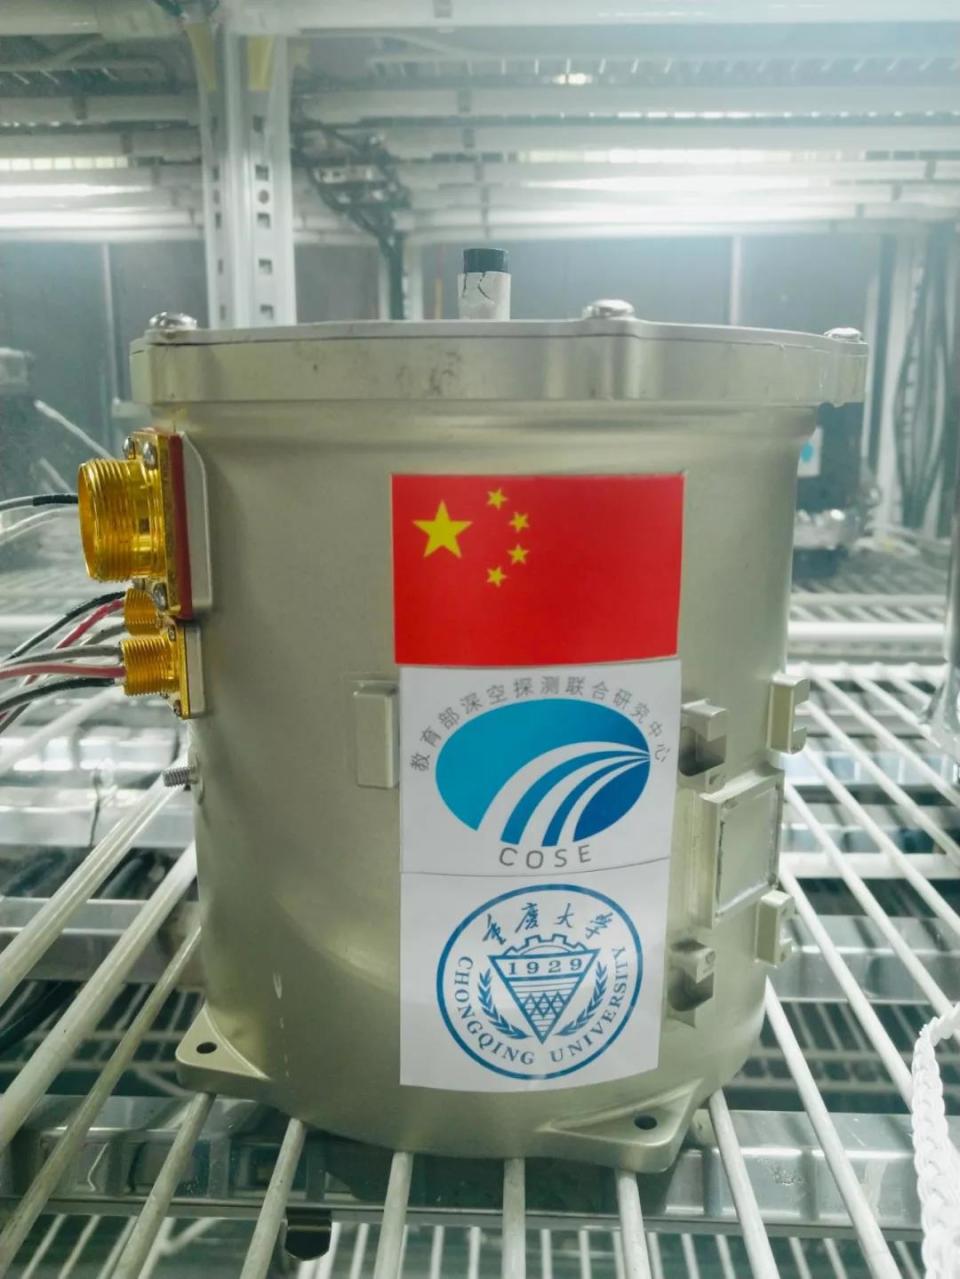 An image of the Chinese biology experimental capsule now on the far side of the moon aboard the Chang'e 4 lander. <cite>Chongqing University</cite>